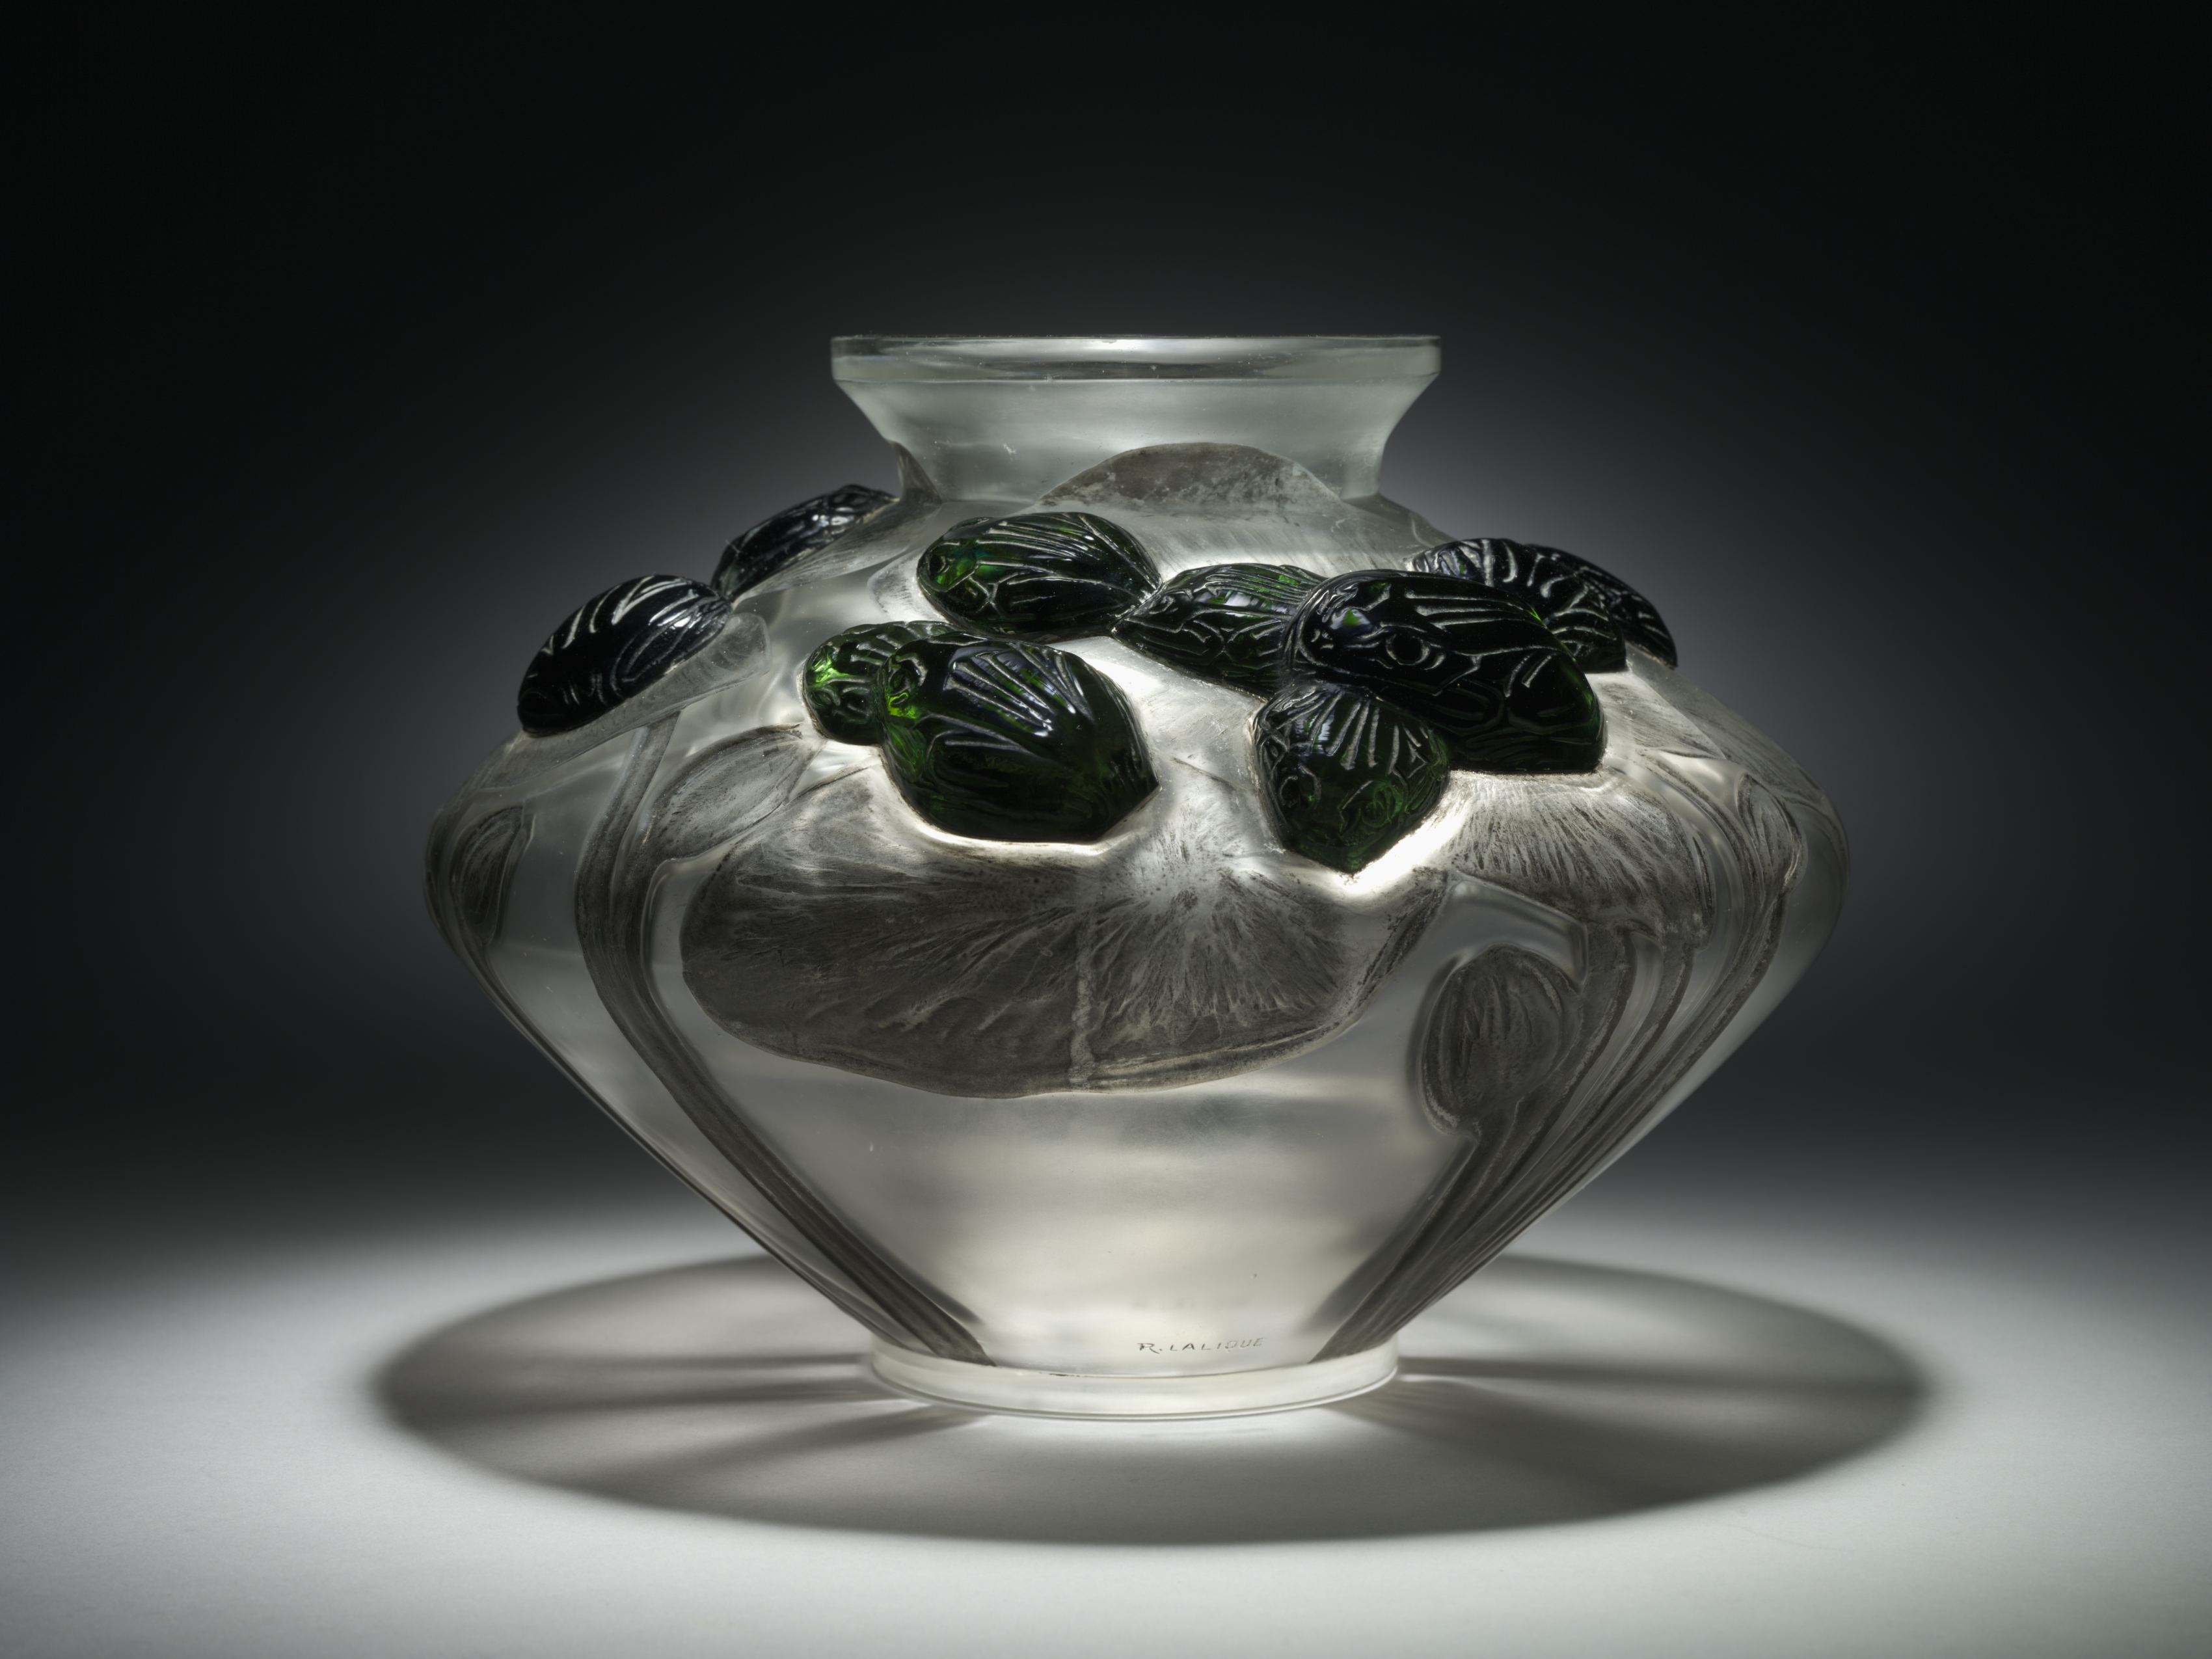 Frogs and Lily Pads (Grenouilles et Nénuphars) Vase